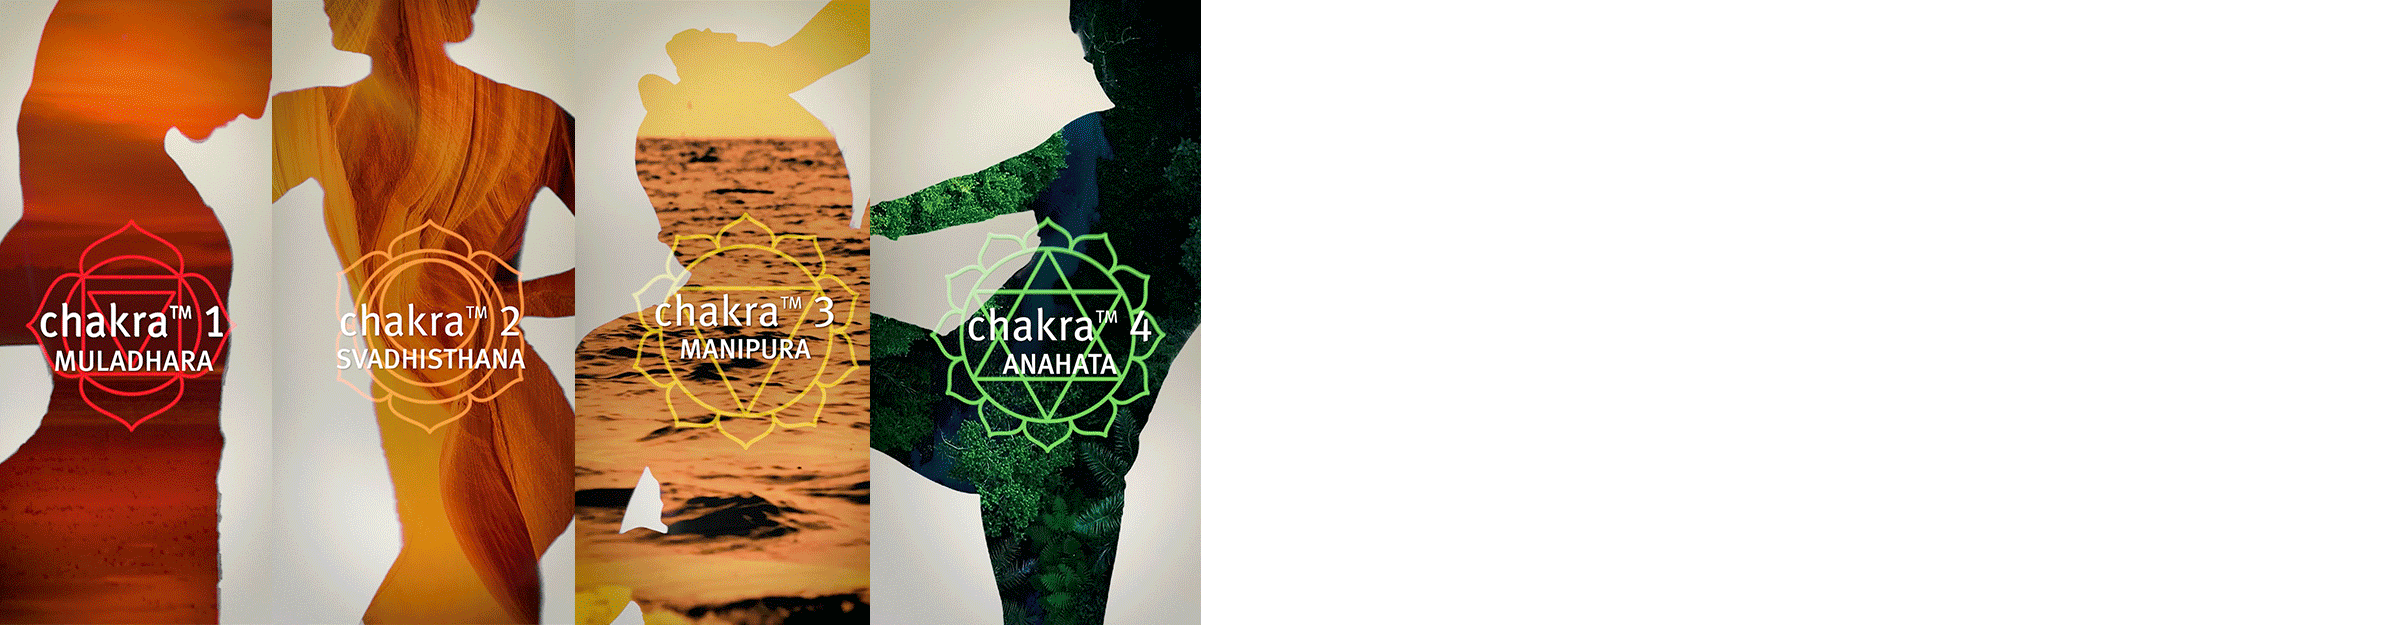 Explore the aromas of chakra. Let your intuition guide your harmony.